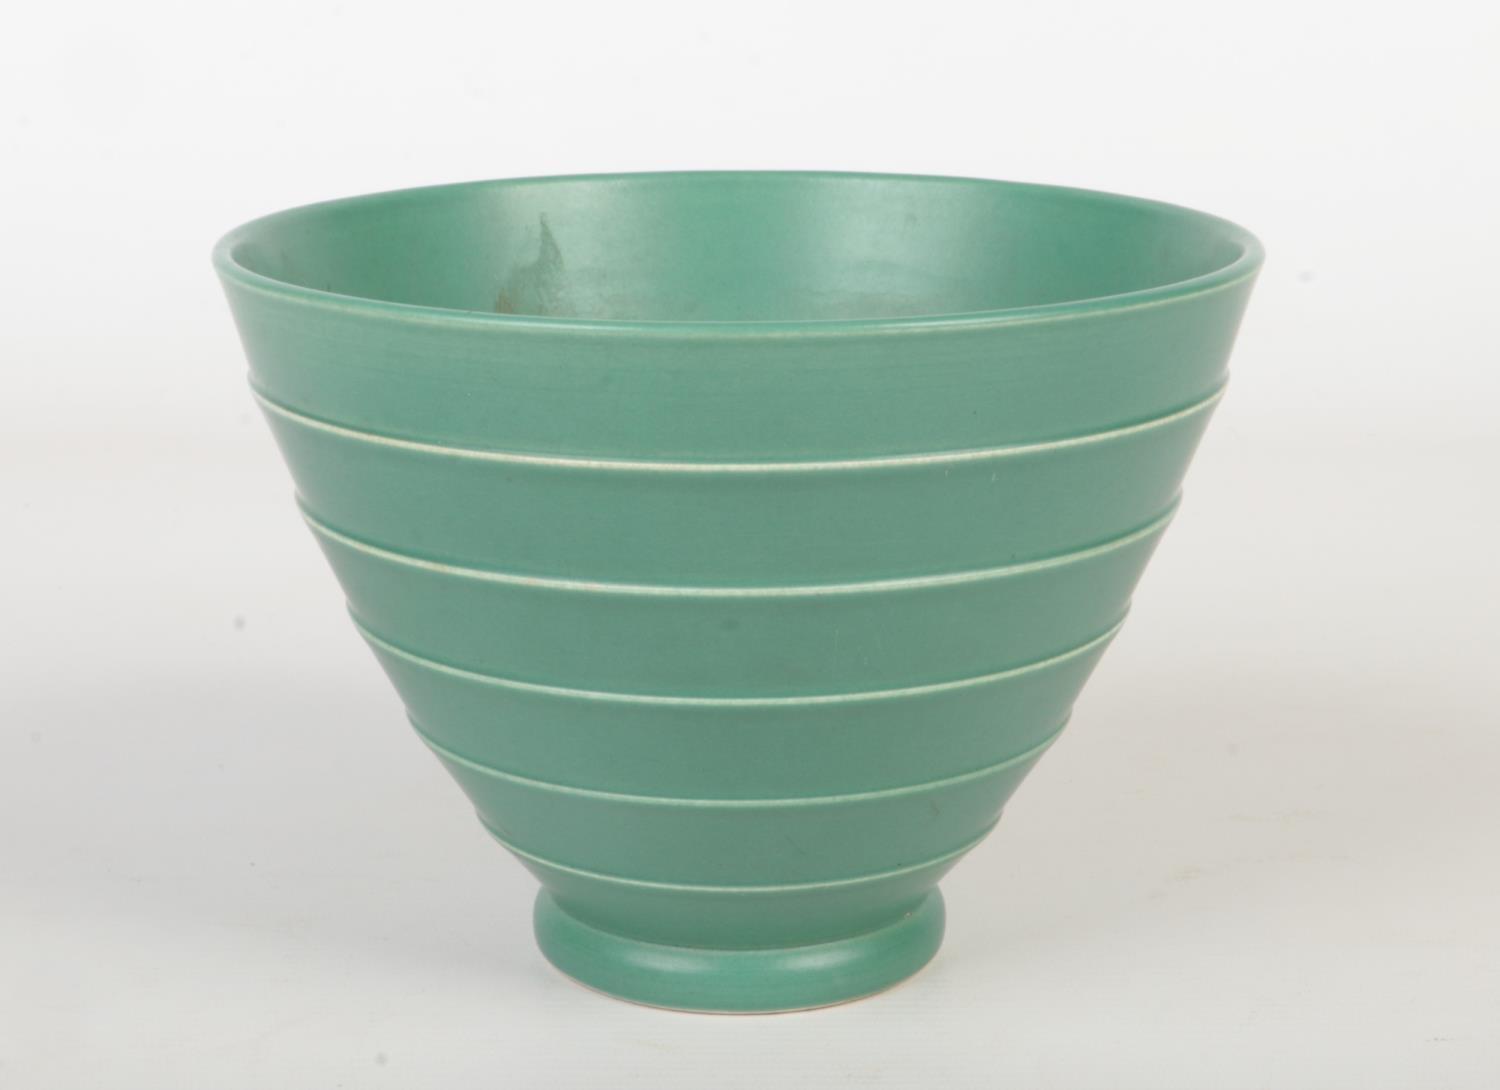 A Wedgwood Art Deco conical bowl designed by Keith Murray. Green glazed and moulded with